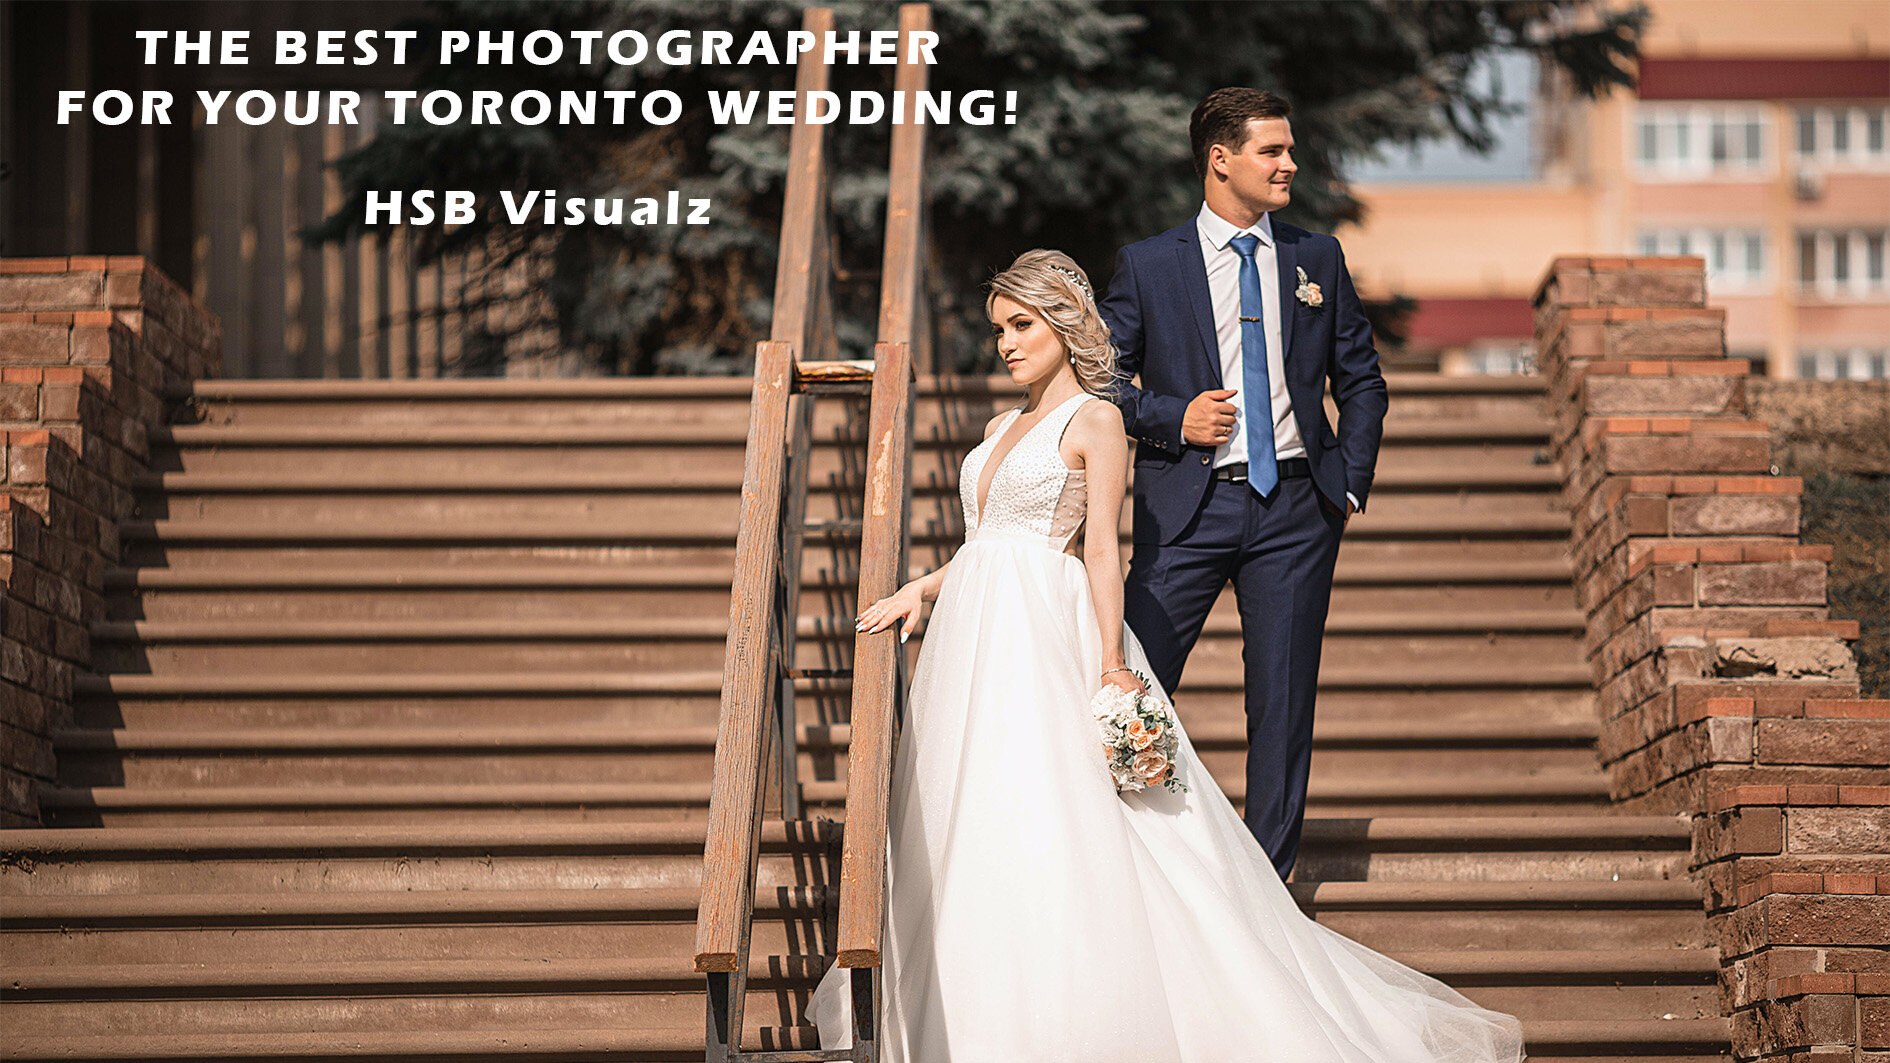 FRIDAY READS: BEST TORONTO WEDDING PHOTOGRAPHER 2023 - HSBVISUALZ 📸🎥

Your wedding day is one of the most important days of your life, and choosing the right Toronto Wedding Photographer to capture those memories is crucial. If you're looking for t